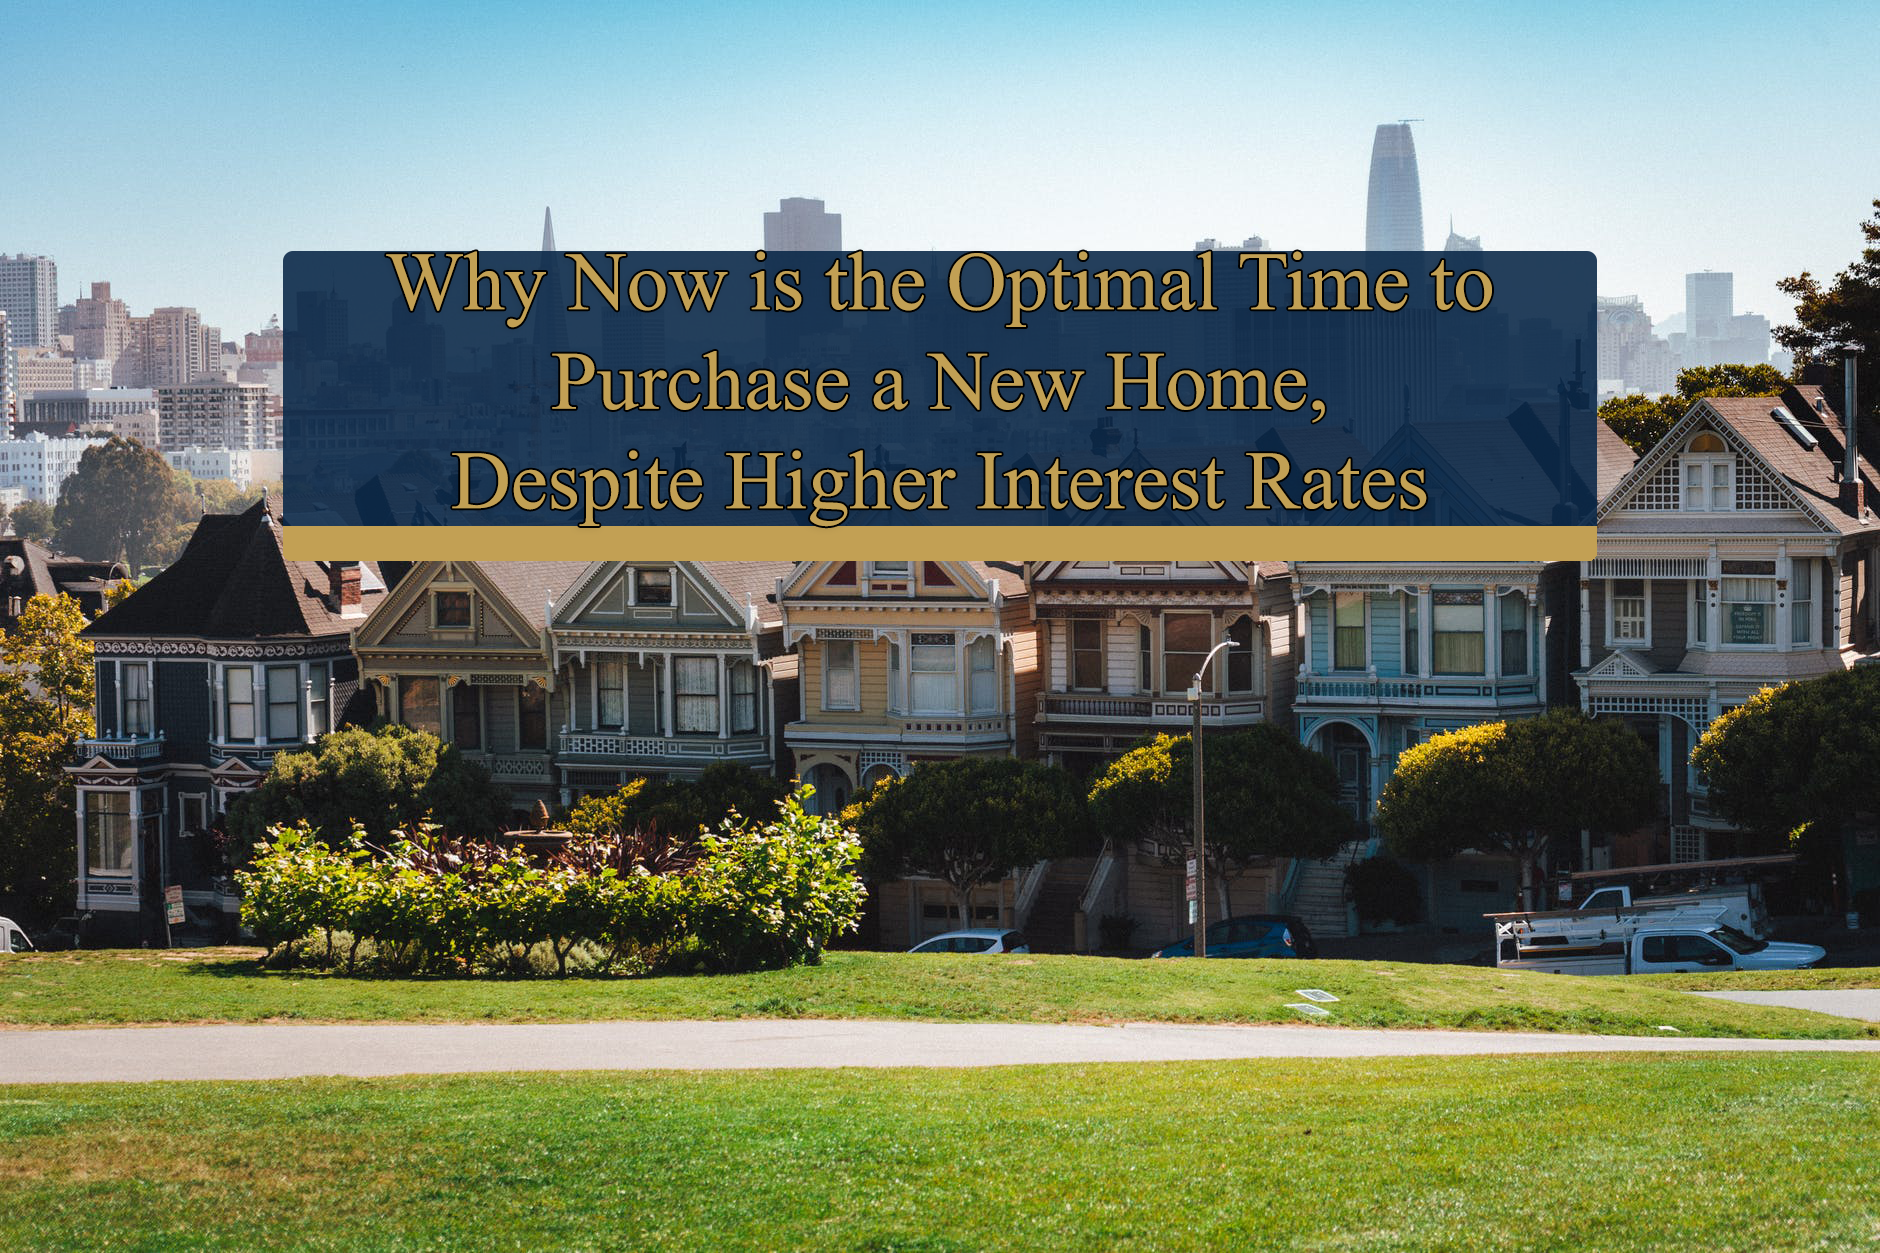 Why Now is the Optimal Time to Buy a Home Despite Interest Rates